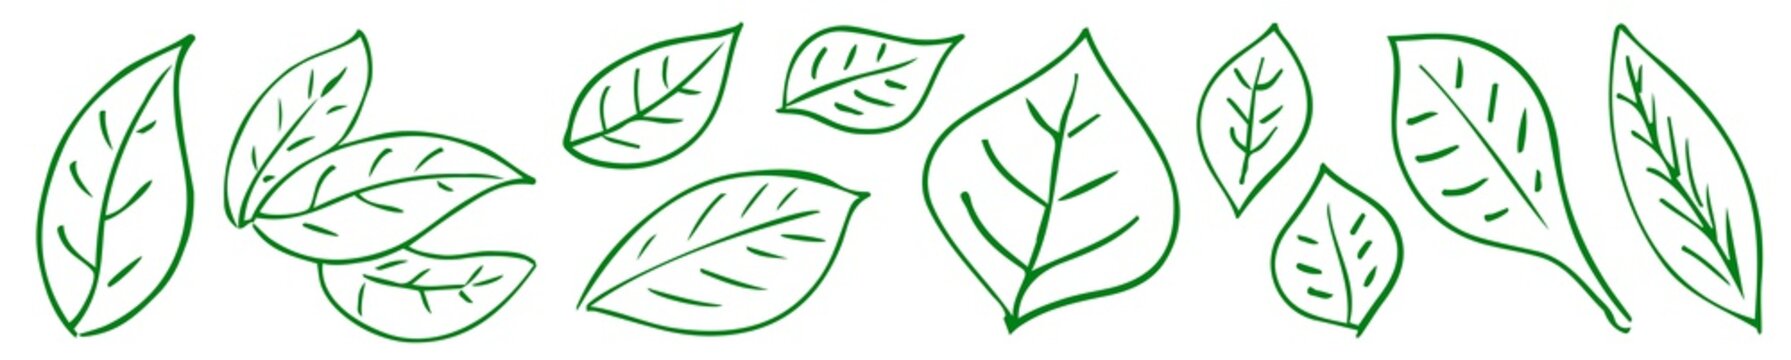 green leaf icon set #isolated #vector